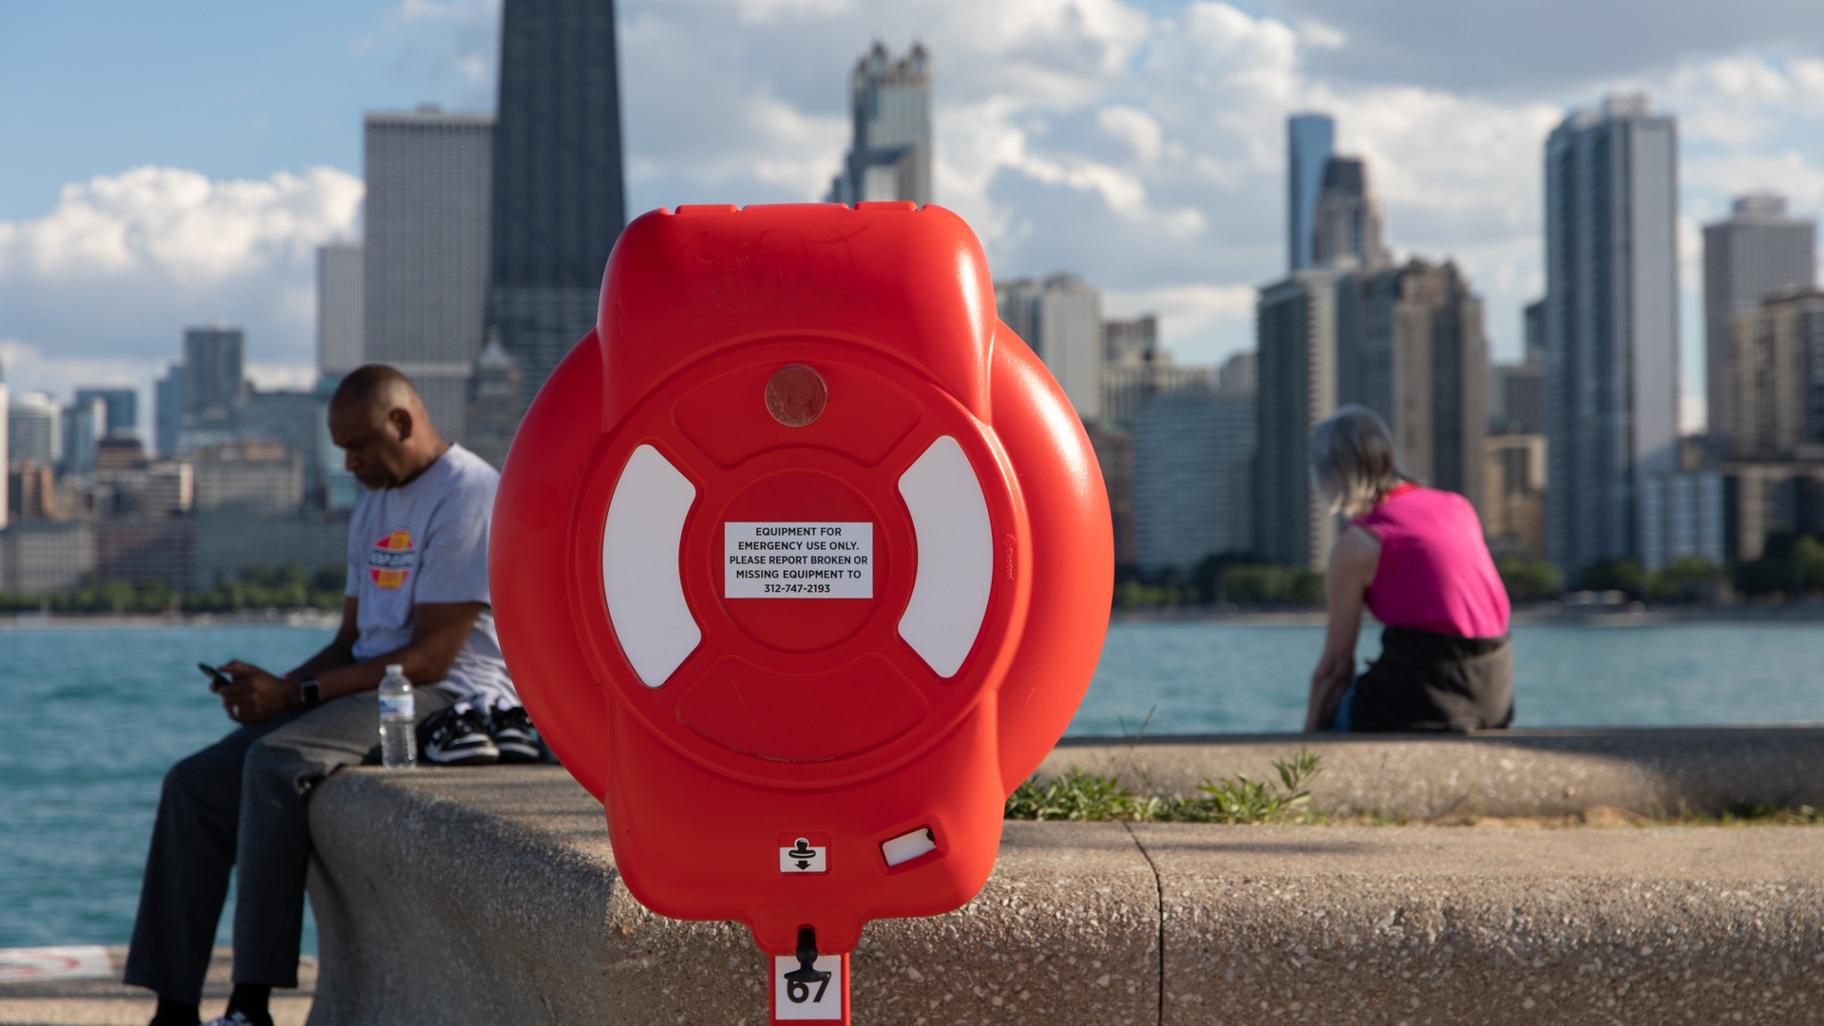 A water rescue device is pictured in a file photo. (Michael Izquierdo / WTTW News)